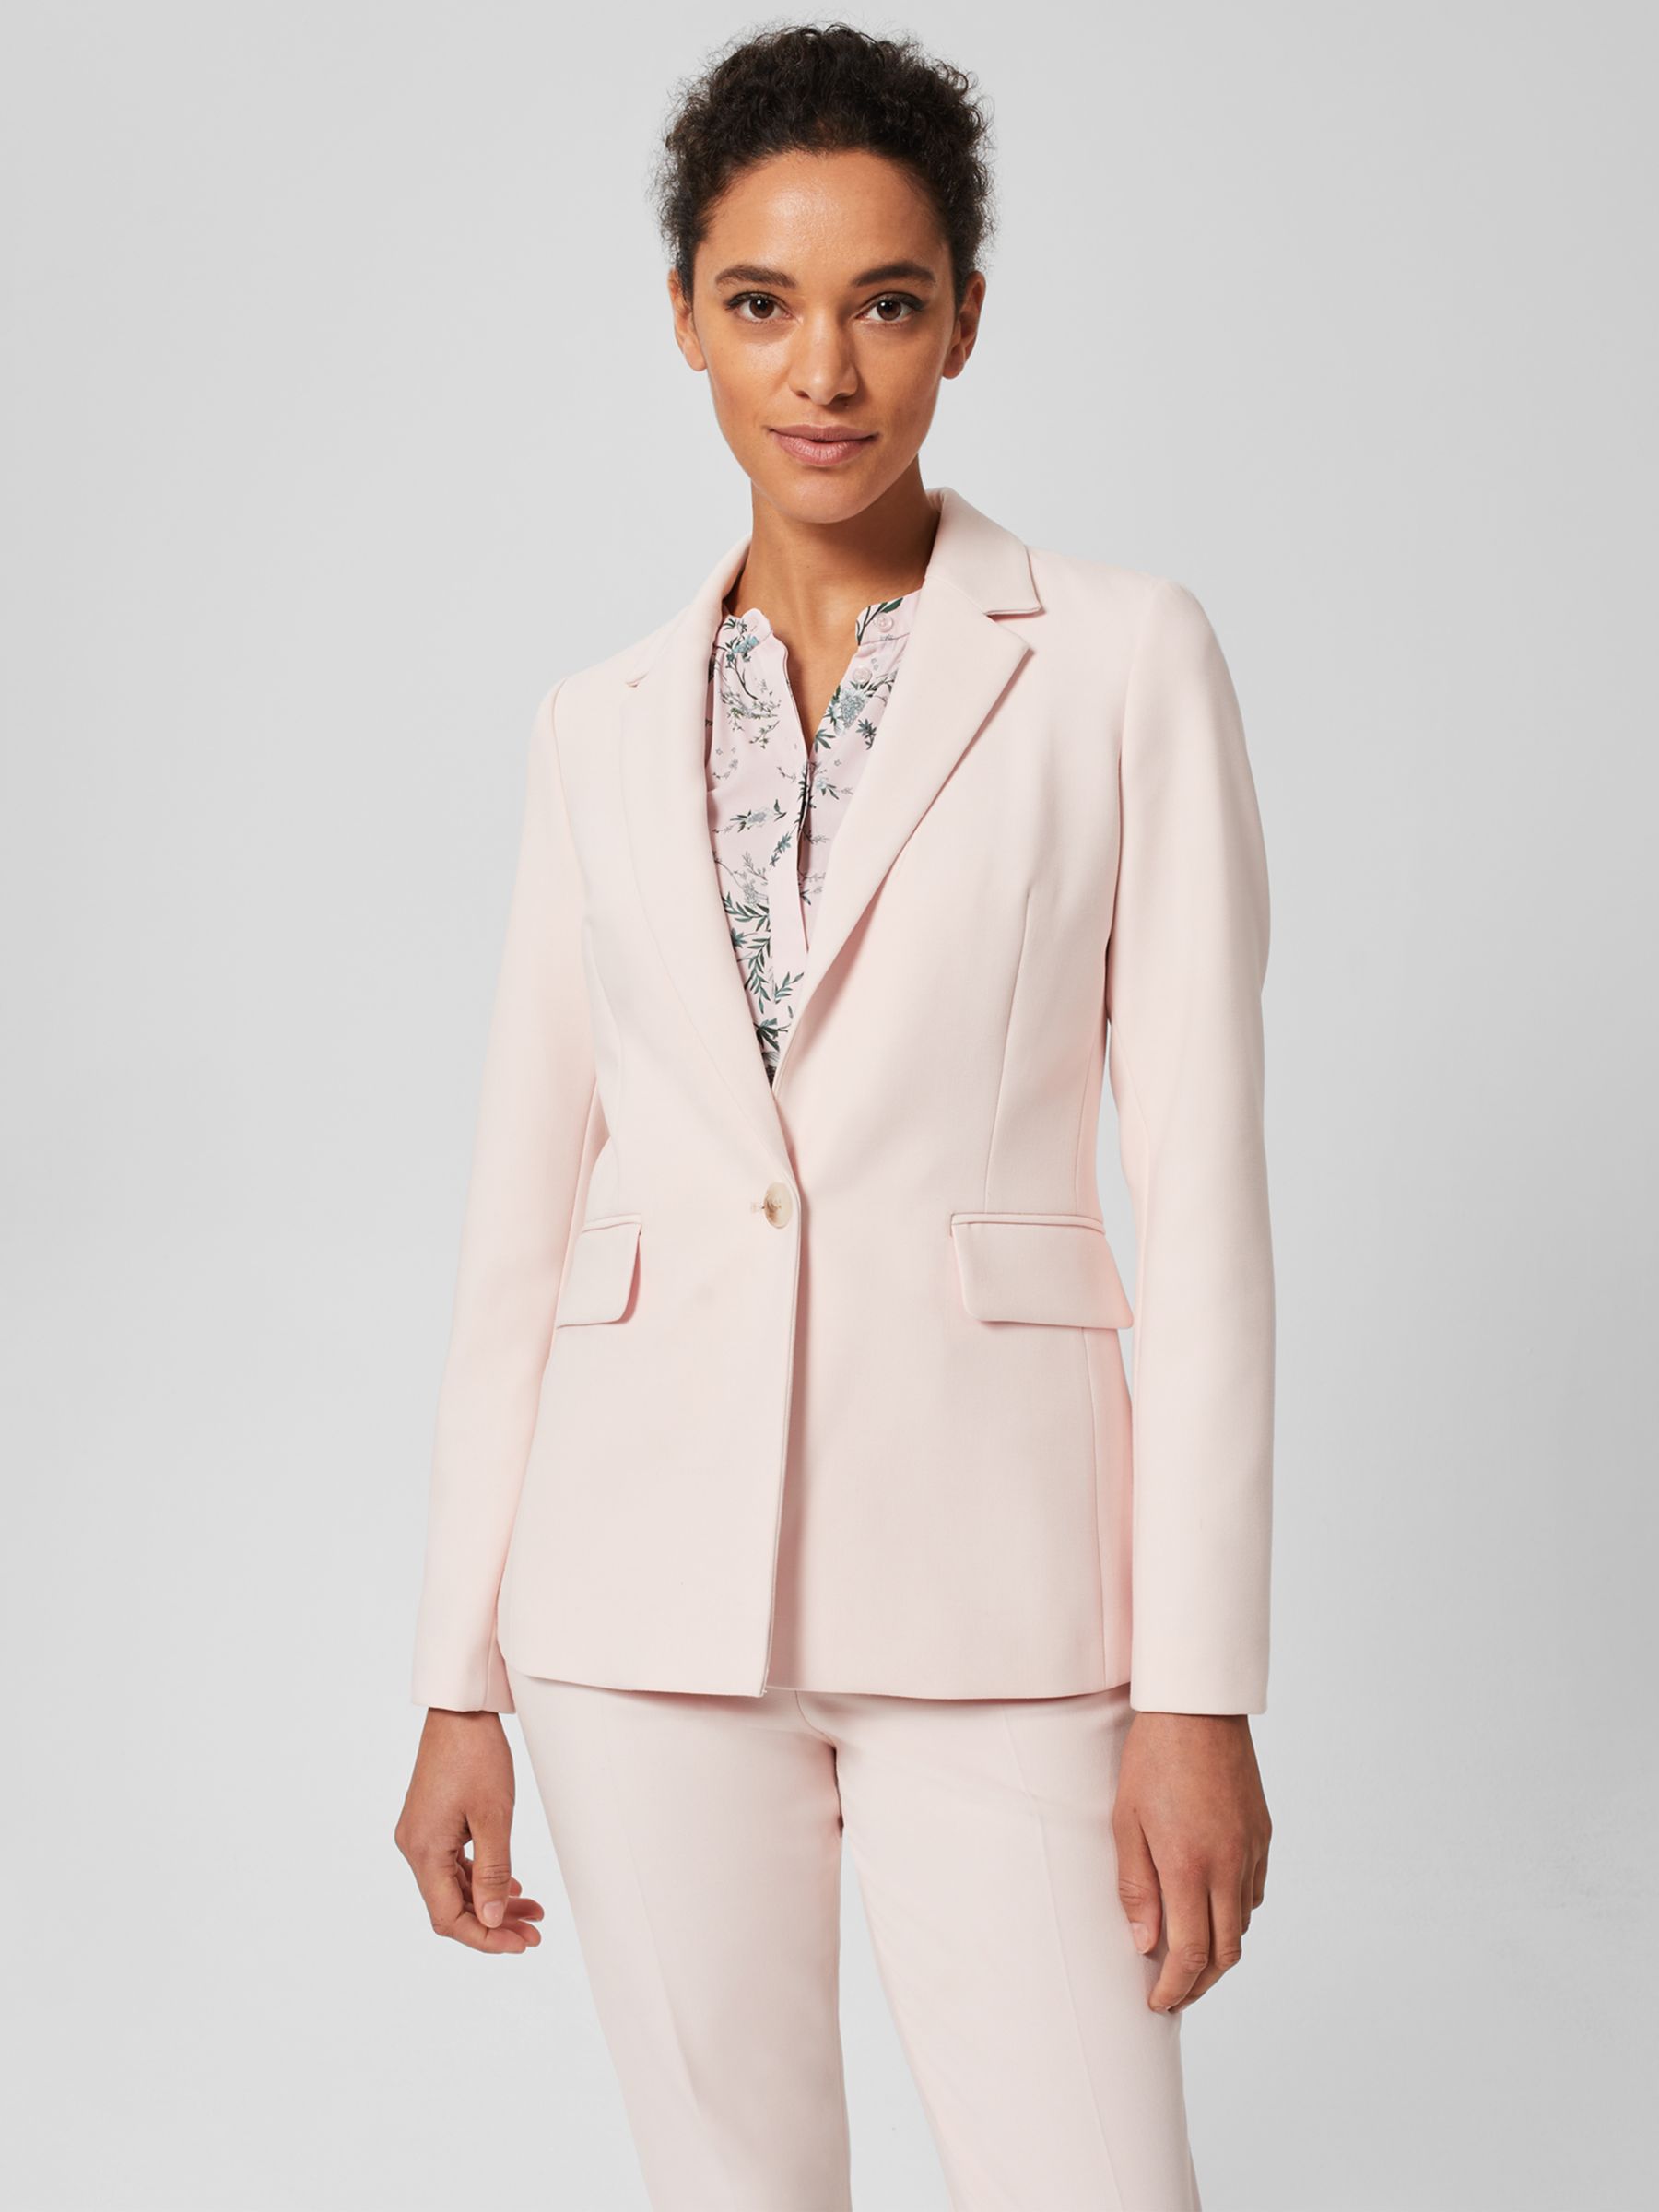 Phase Eight Petite Eira Trousers, Soft Pink at John Lewis & Partners